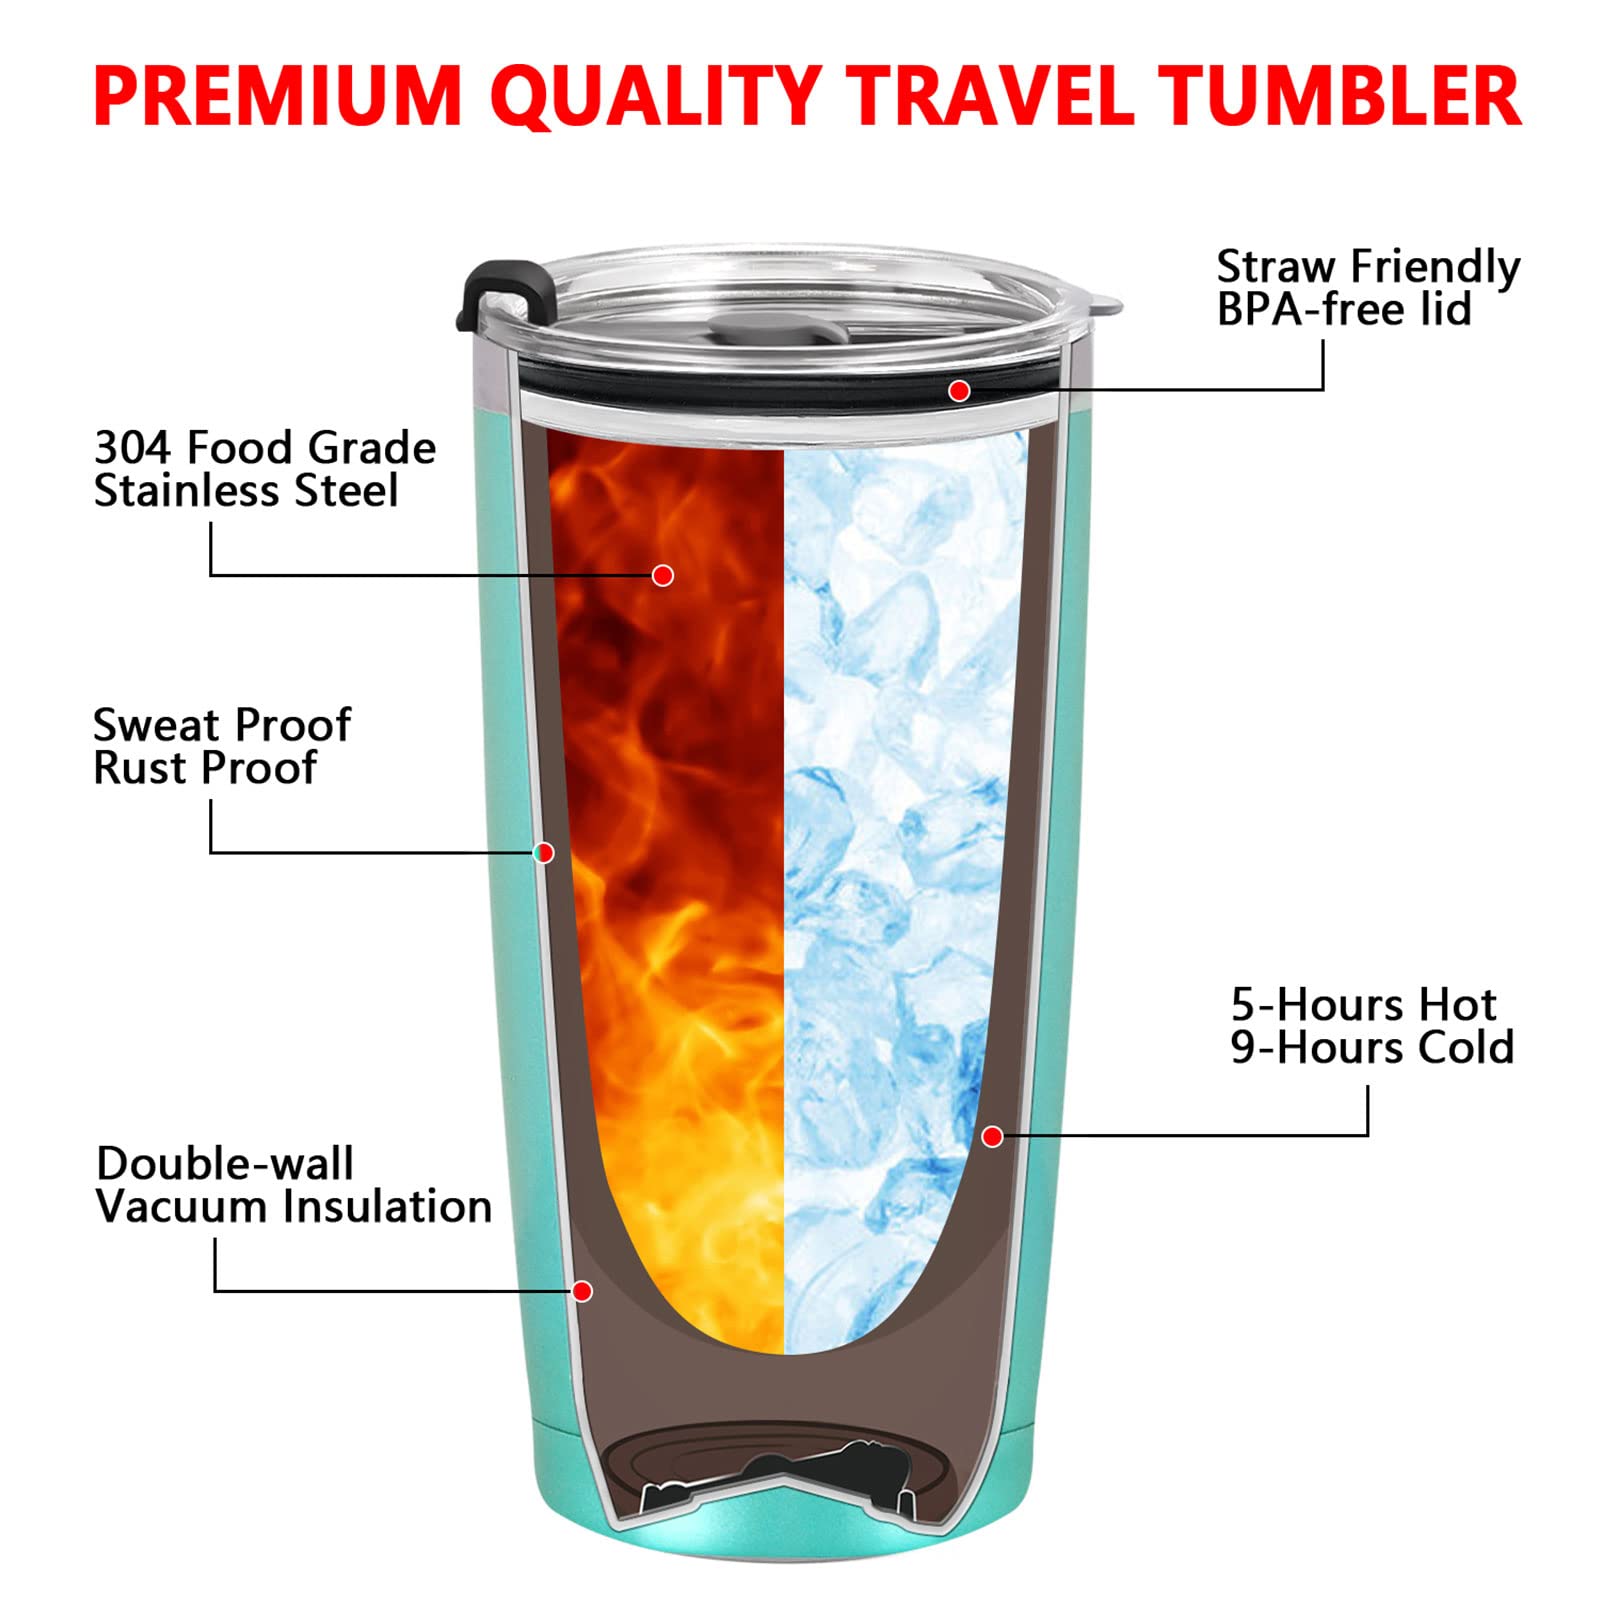 GINGPROUS Daughter In Law Gifts, The Only Thing Better Than Having You Tumbler Mothers Day Birthday Gifts Christmas Gifts for Daughter In Law from Mother In Law, 20oz Insulate Travel Tumbler, Mint